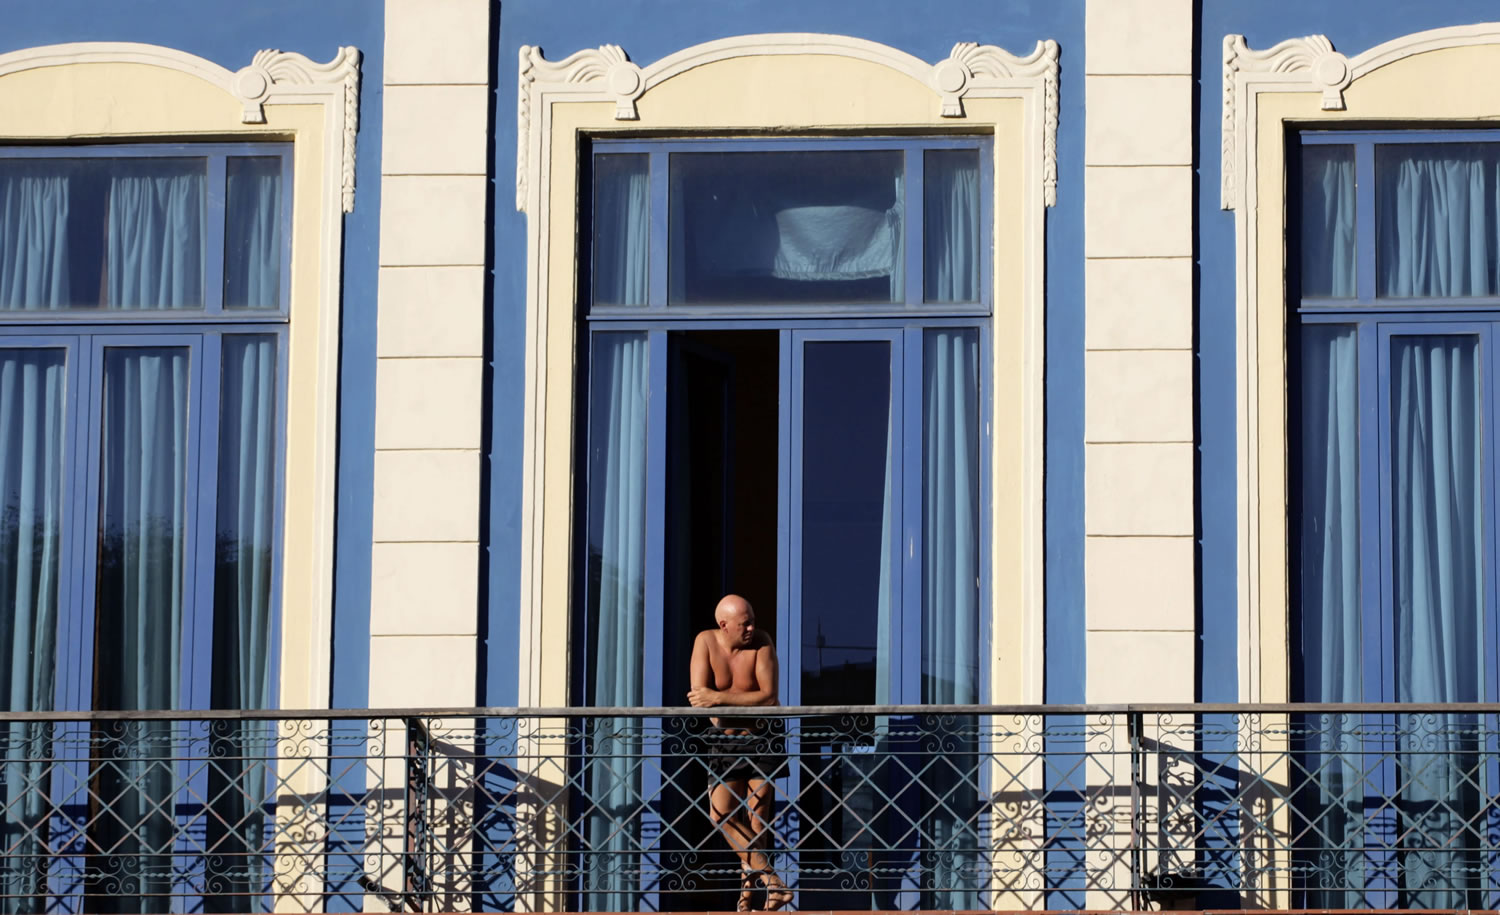 A tourist looks out from his hotel room's balcony in Havana, Cuba.